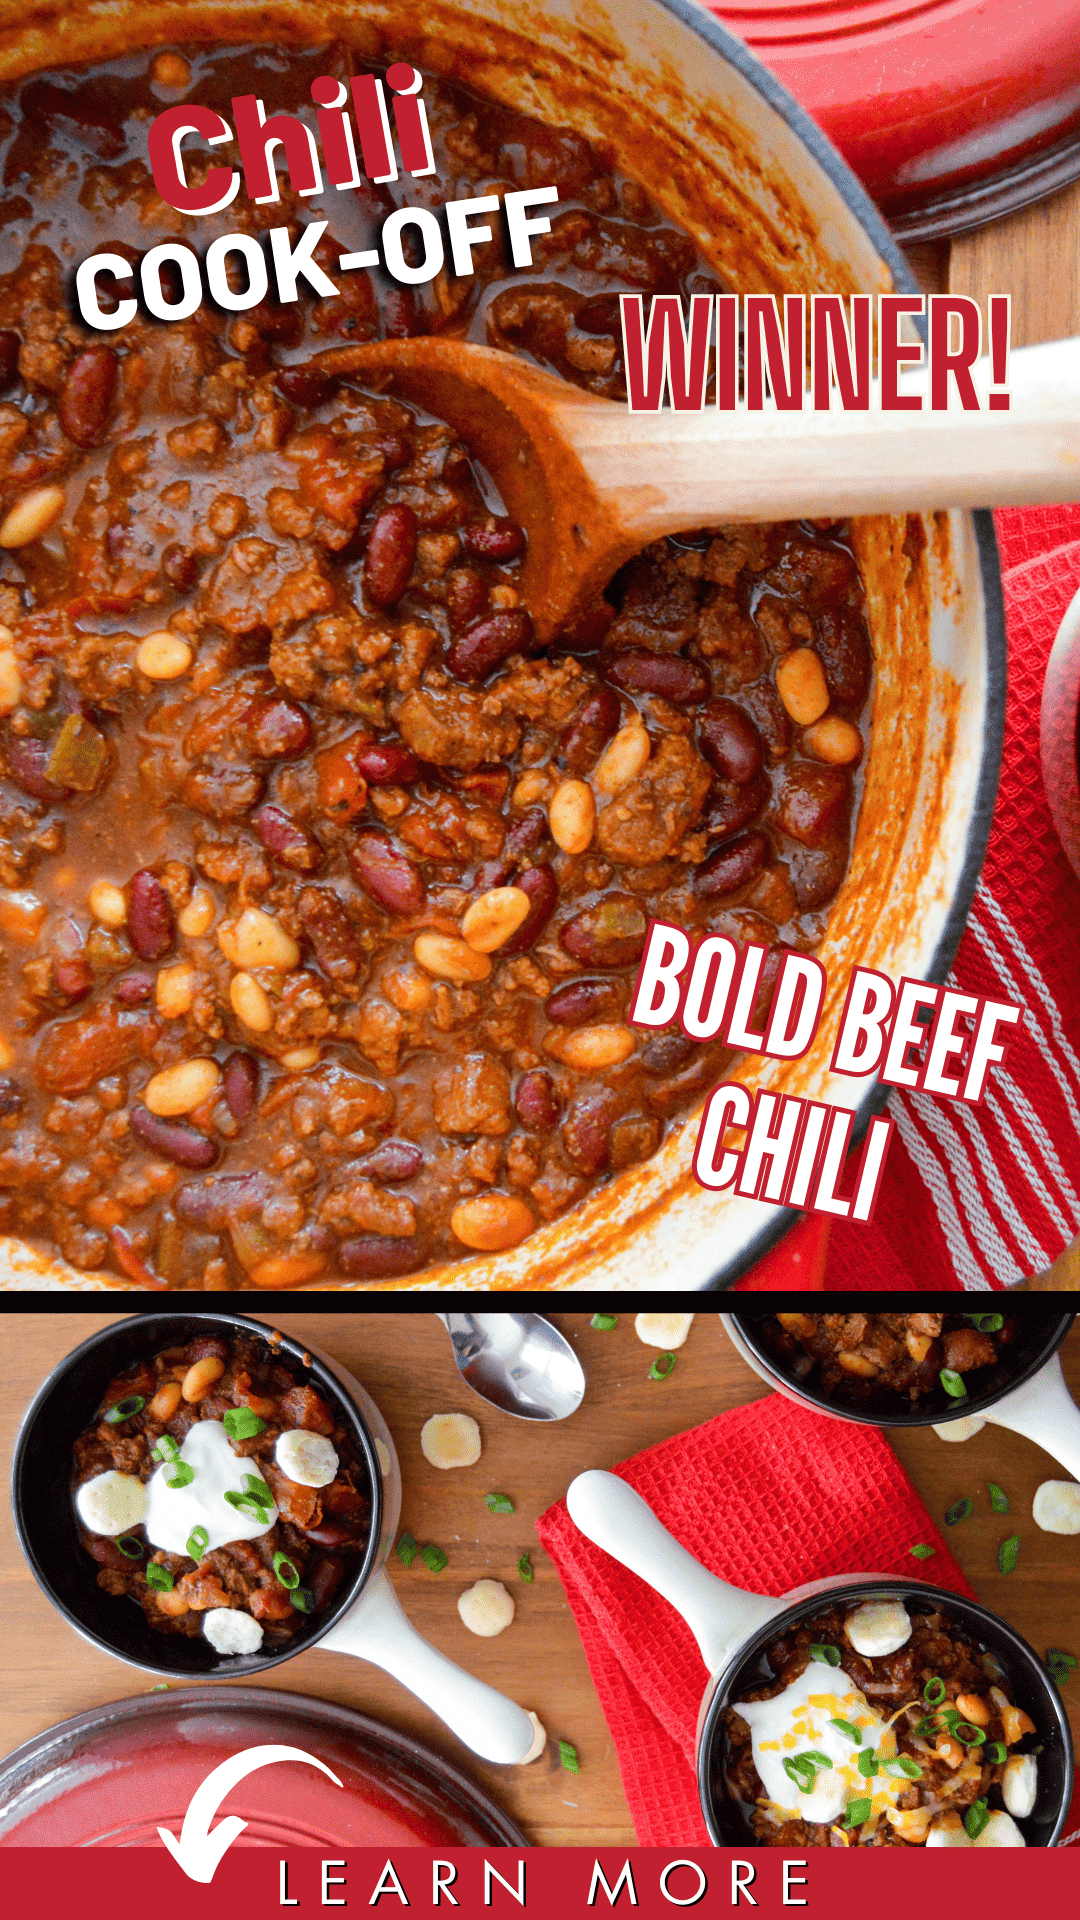 Chili Cook Off Winning bold beef chili Pinterest Pin showing big pot of chili and some plated in bowls below.